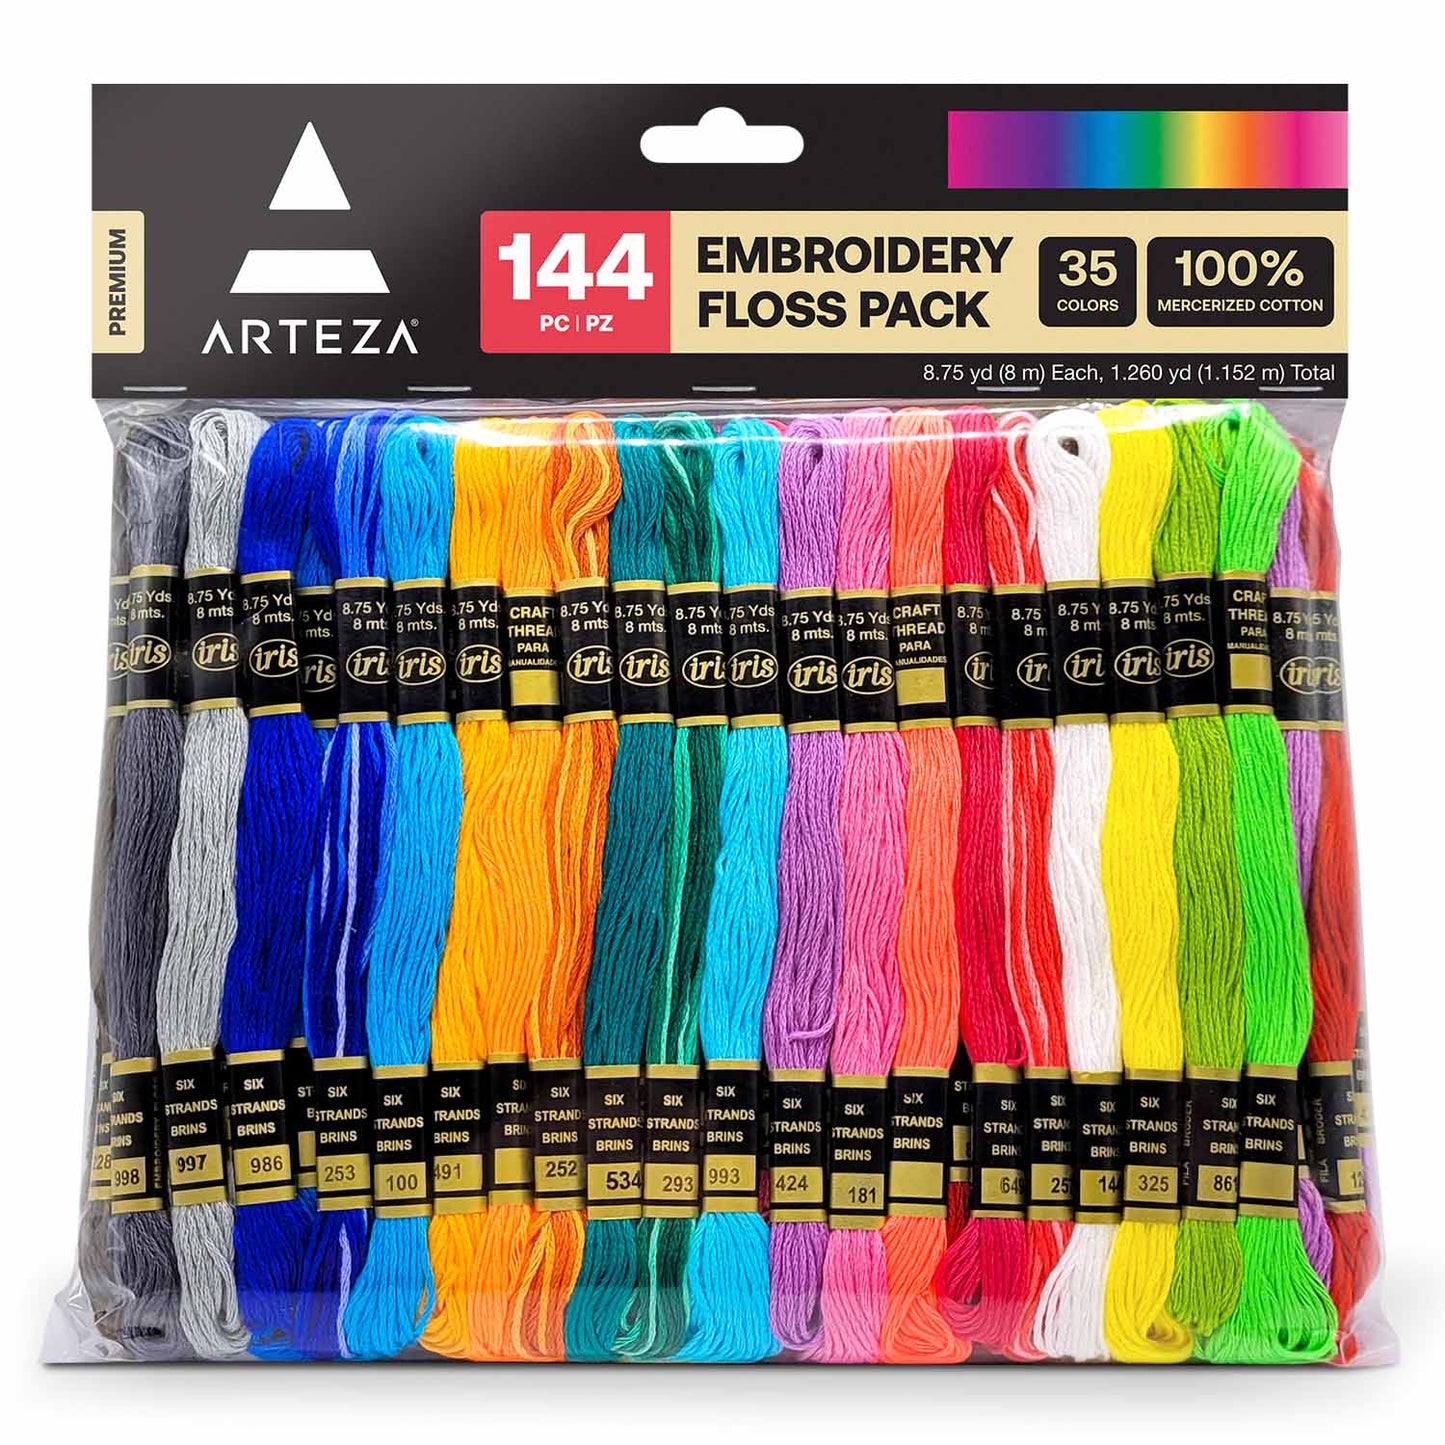 Embroidery Floss, 35 Colors  - 144 Pieces